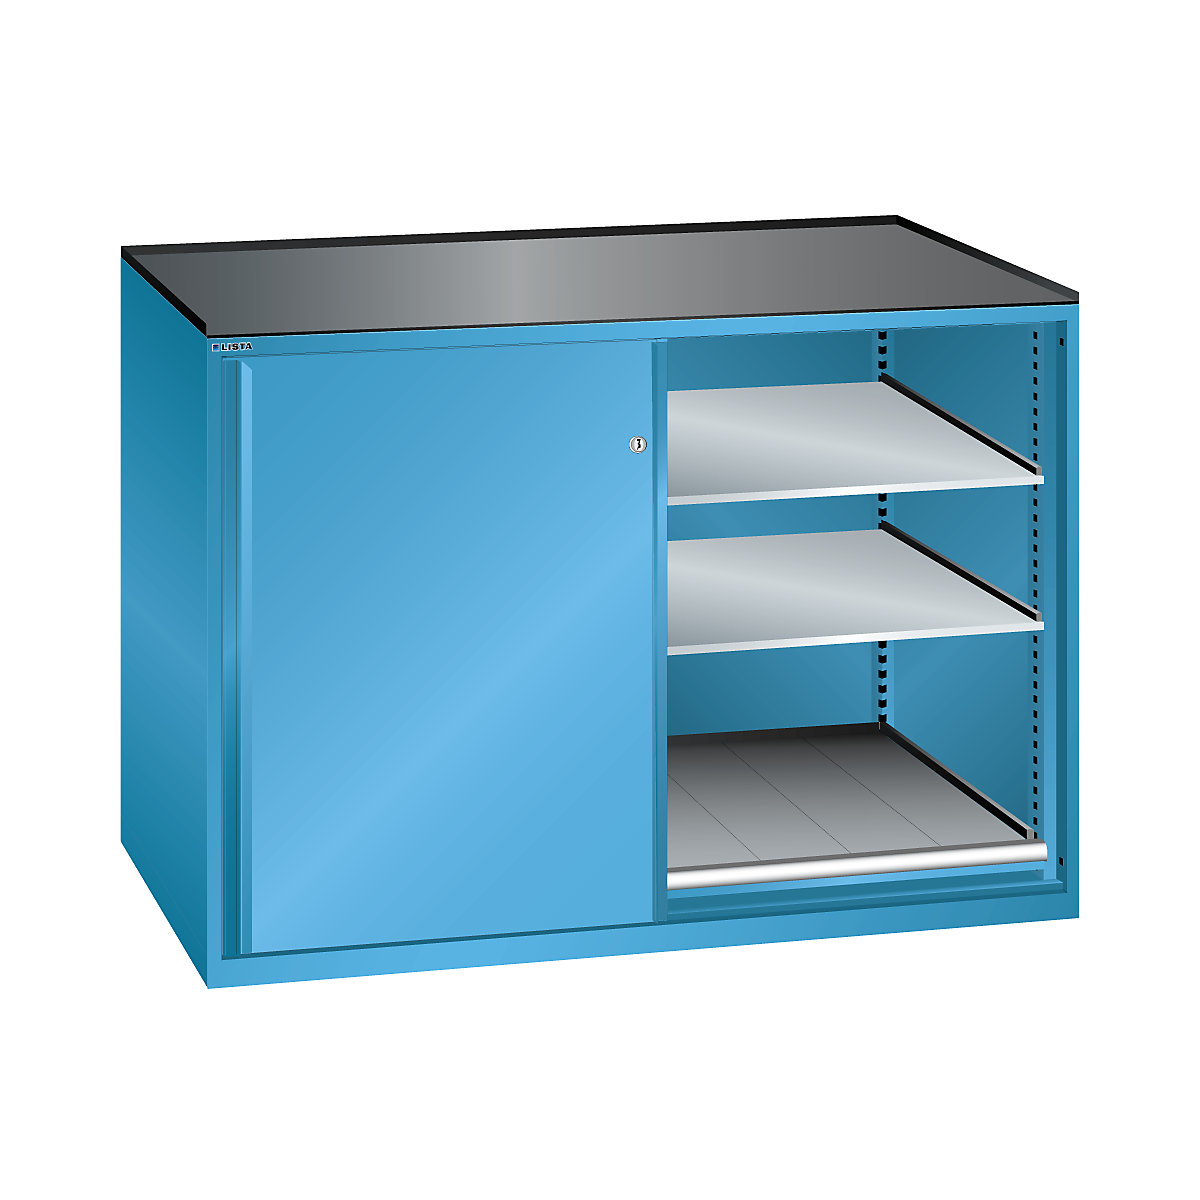 Sliding door cupboard, max. load of pull-out shelf 200 kg - LISTA